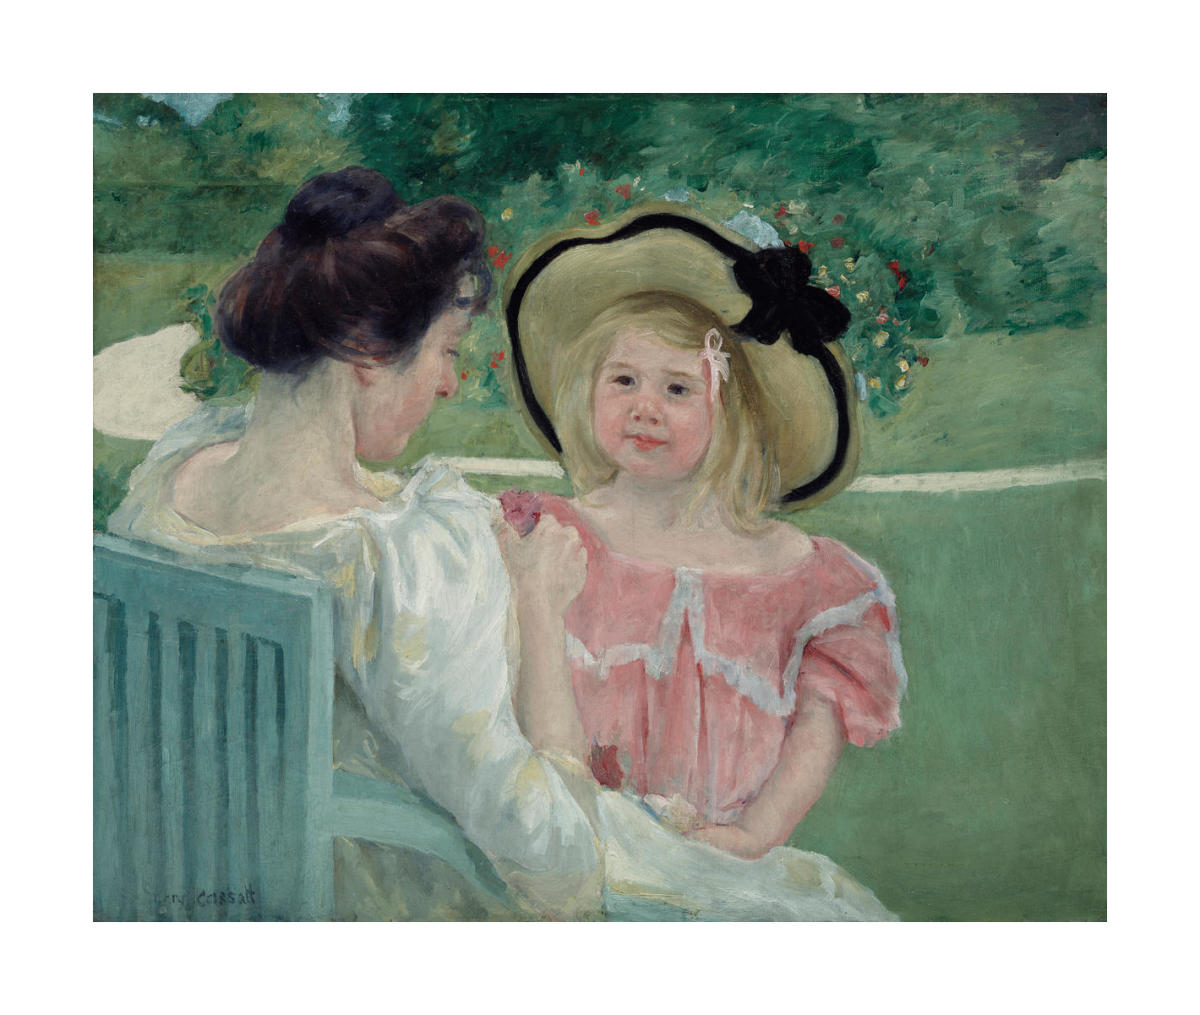 In the Garden, 1903 or 1904 by Cassatt - Paper Print - DIA Custom Prints - Custom Prints and Framing From the Detroit Institute of Arts